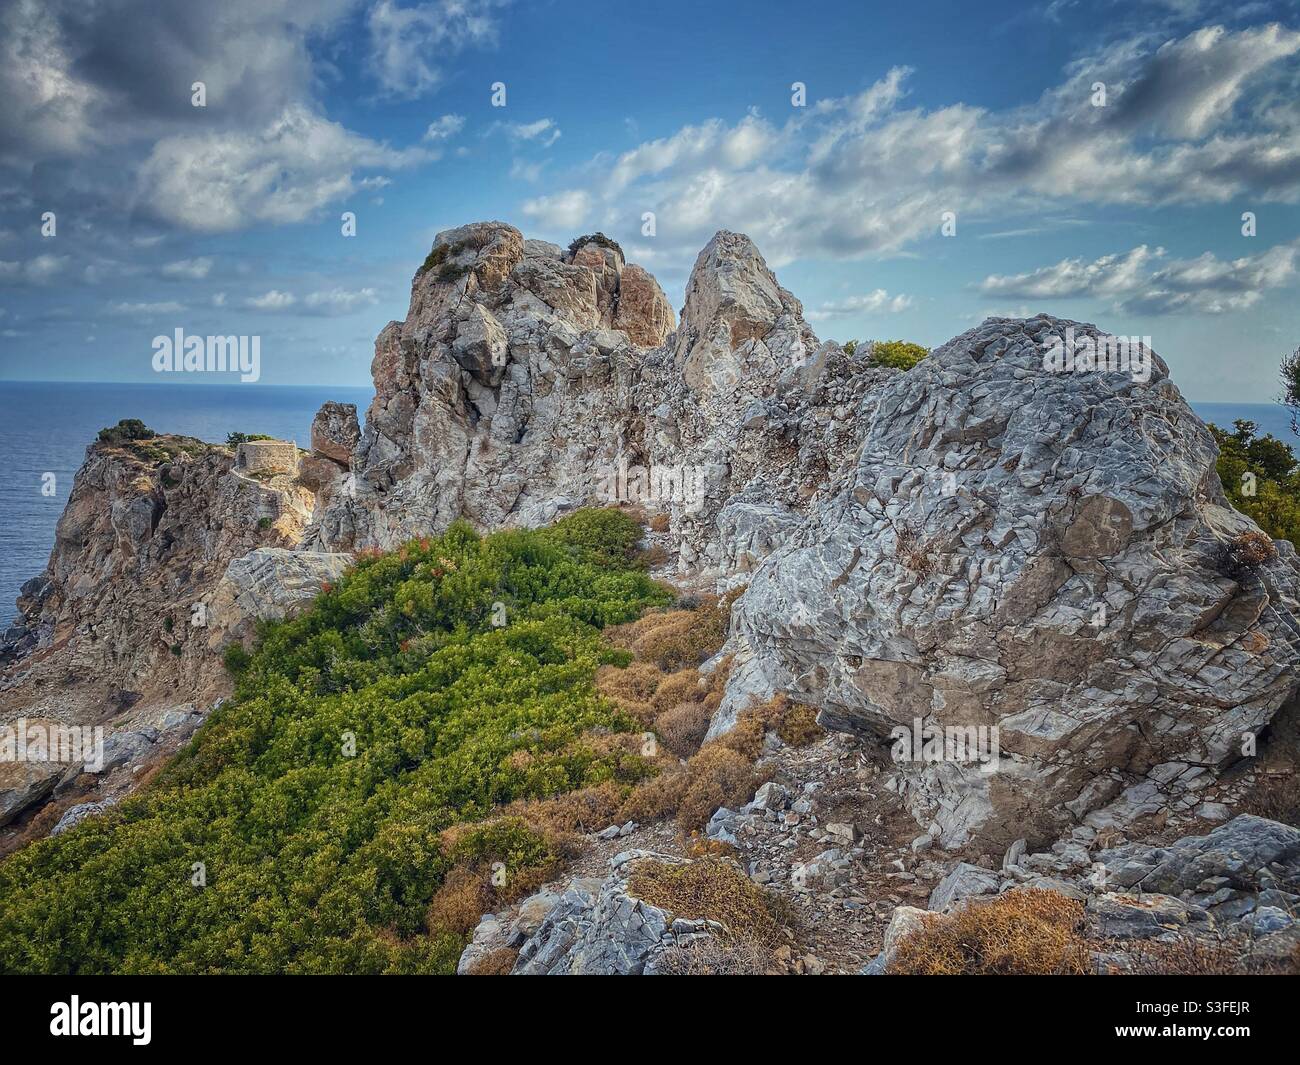 Rocks and cliffs near Kastro fortress on the North of Skiathos island, Greece. Stock Photo